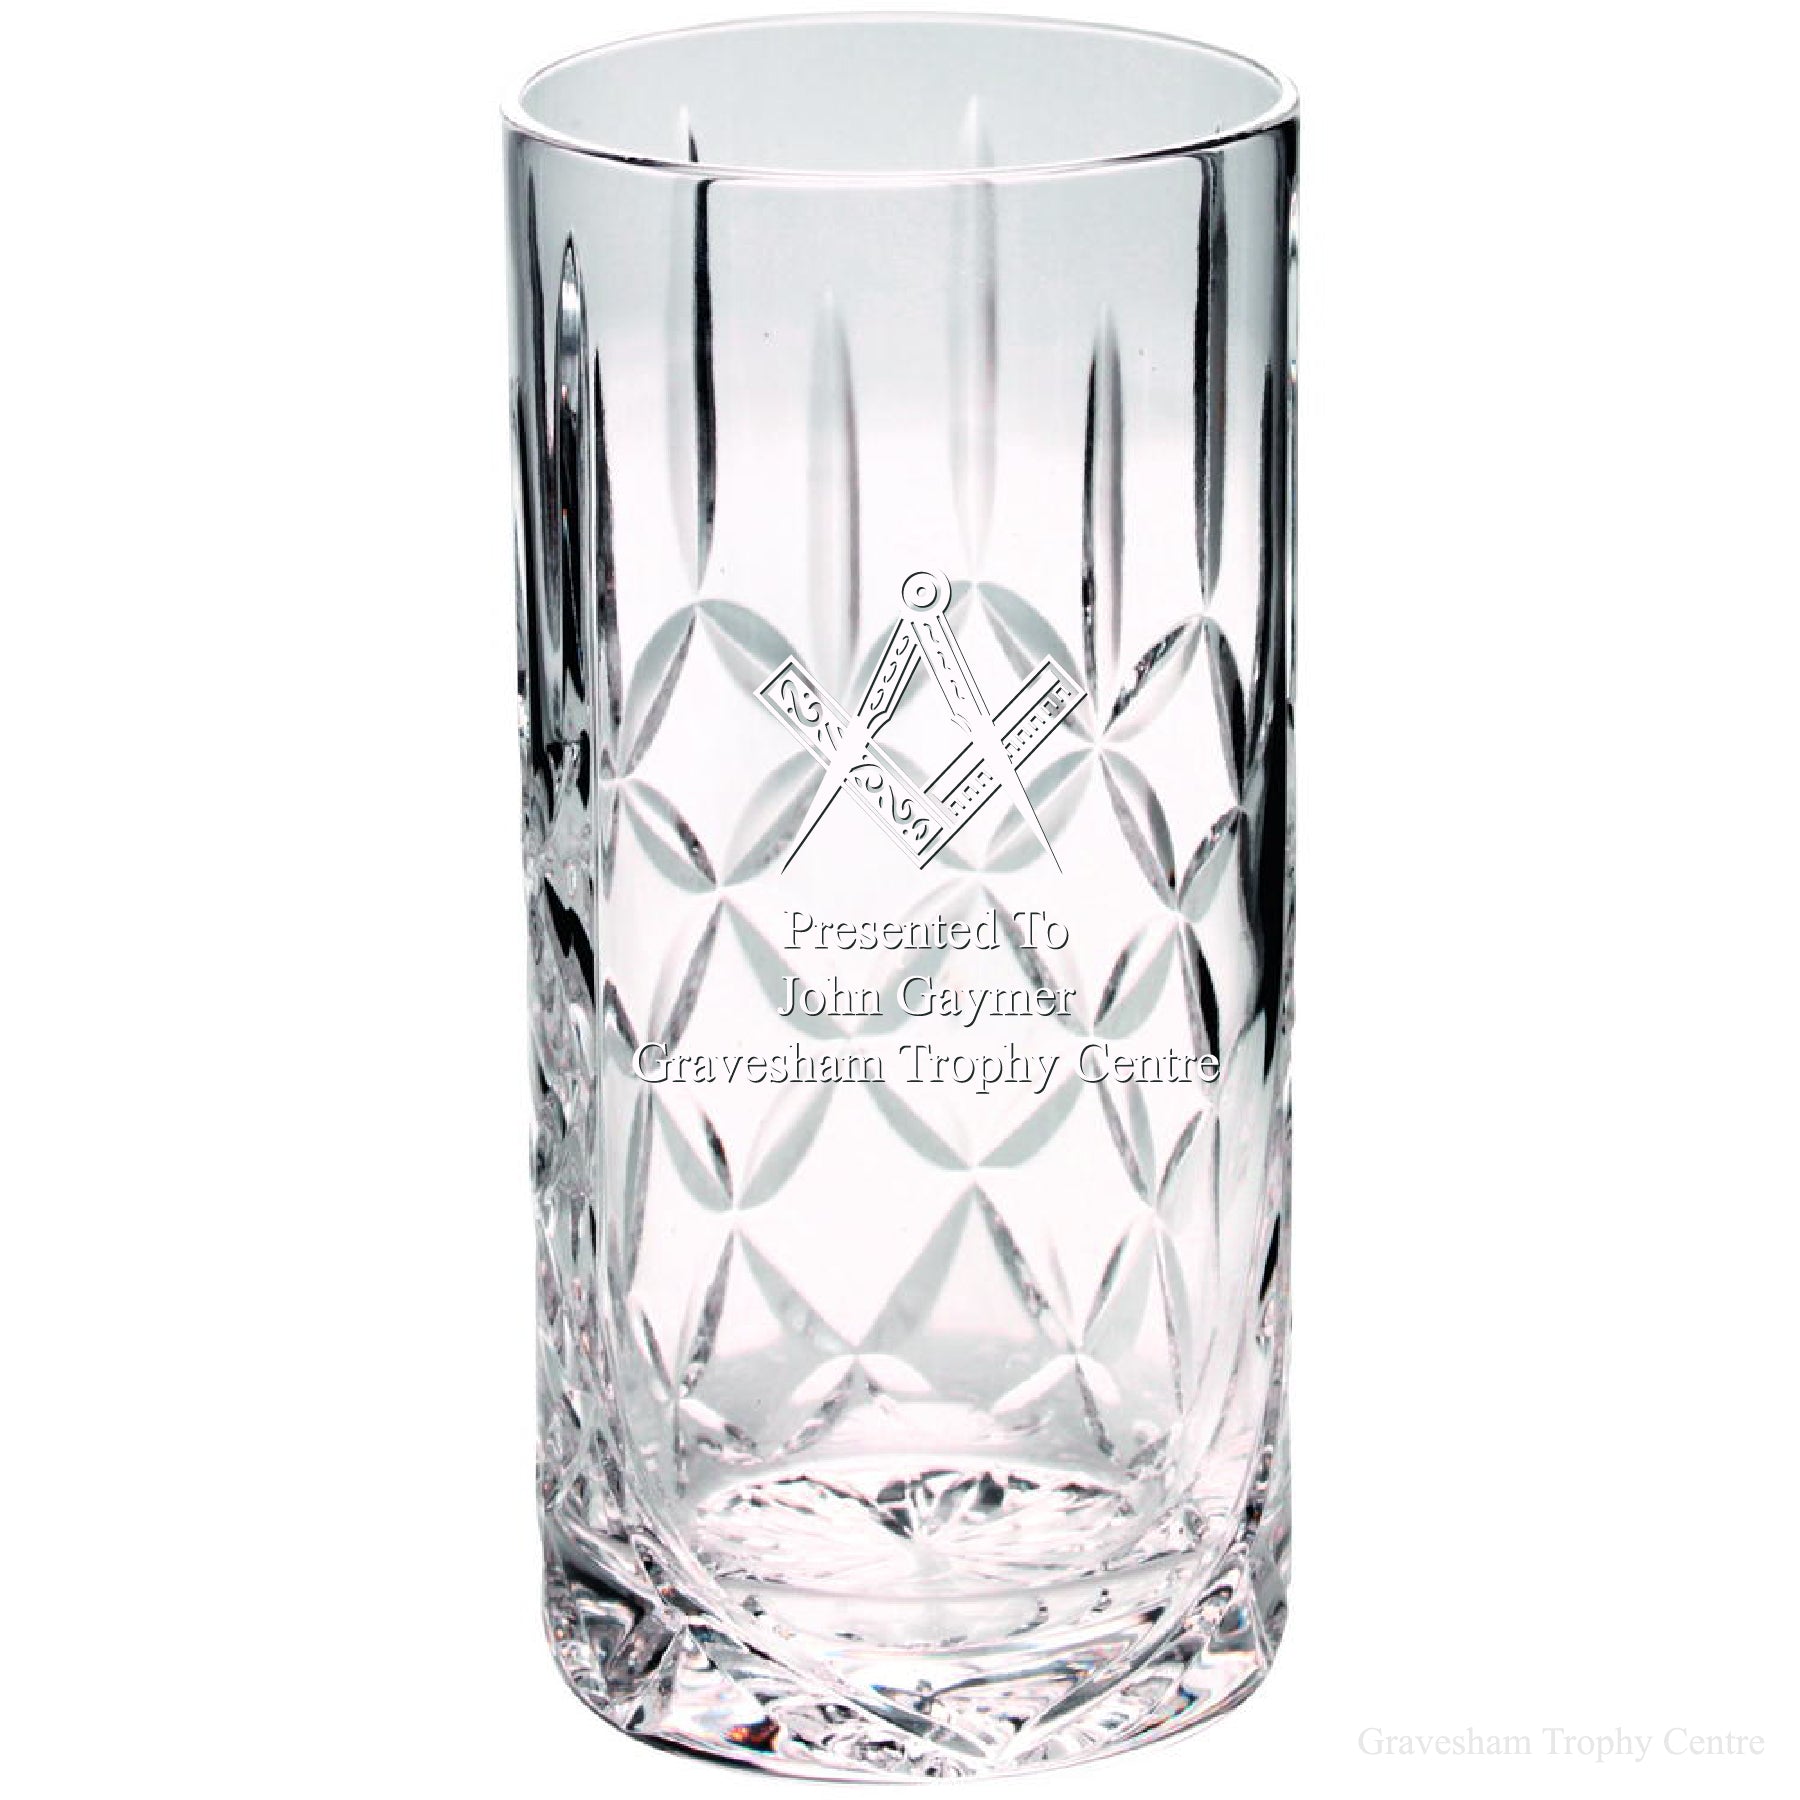 Etched Masonic Highball Glass Tumbler 24% Lead Crystal. Satin Gift Box included.